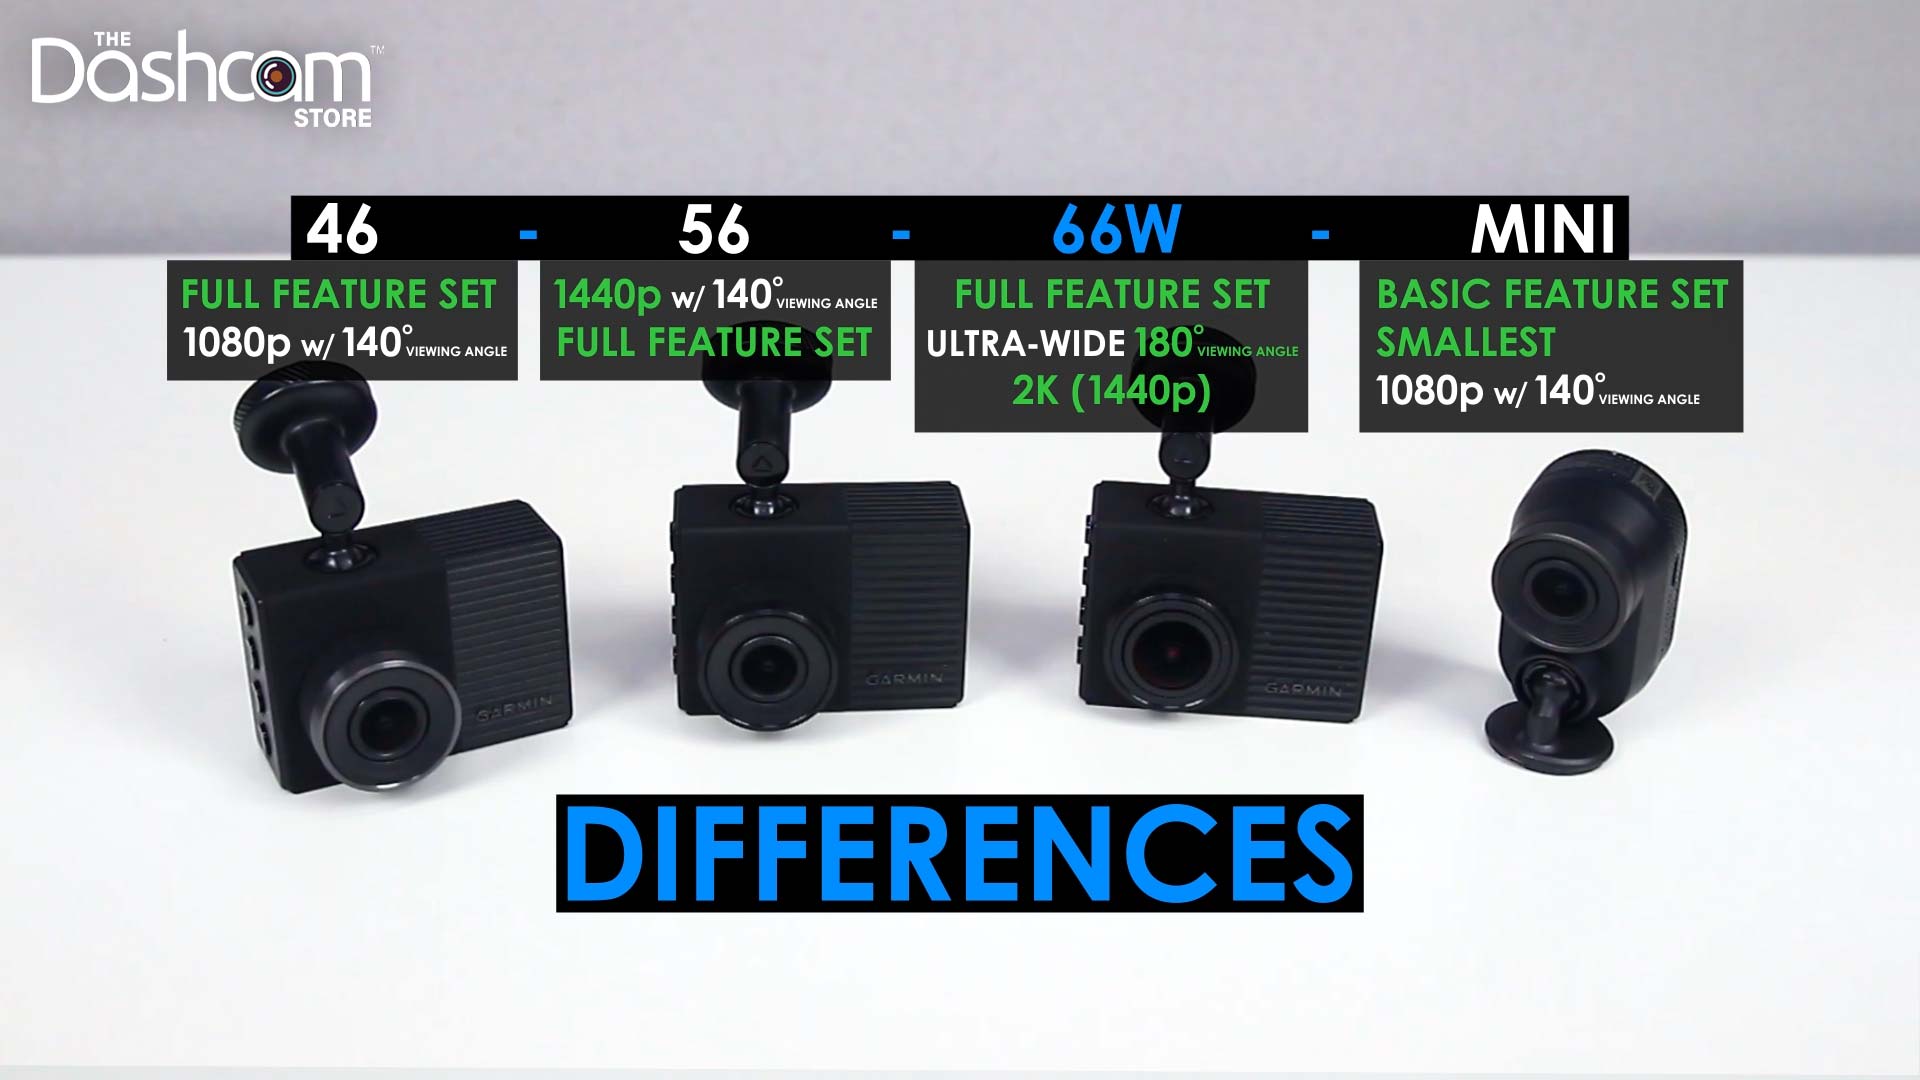 Unboxing the 46, 56, 66W, & Dash Cams - The Dashcam Store